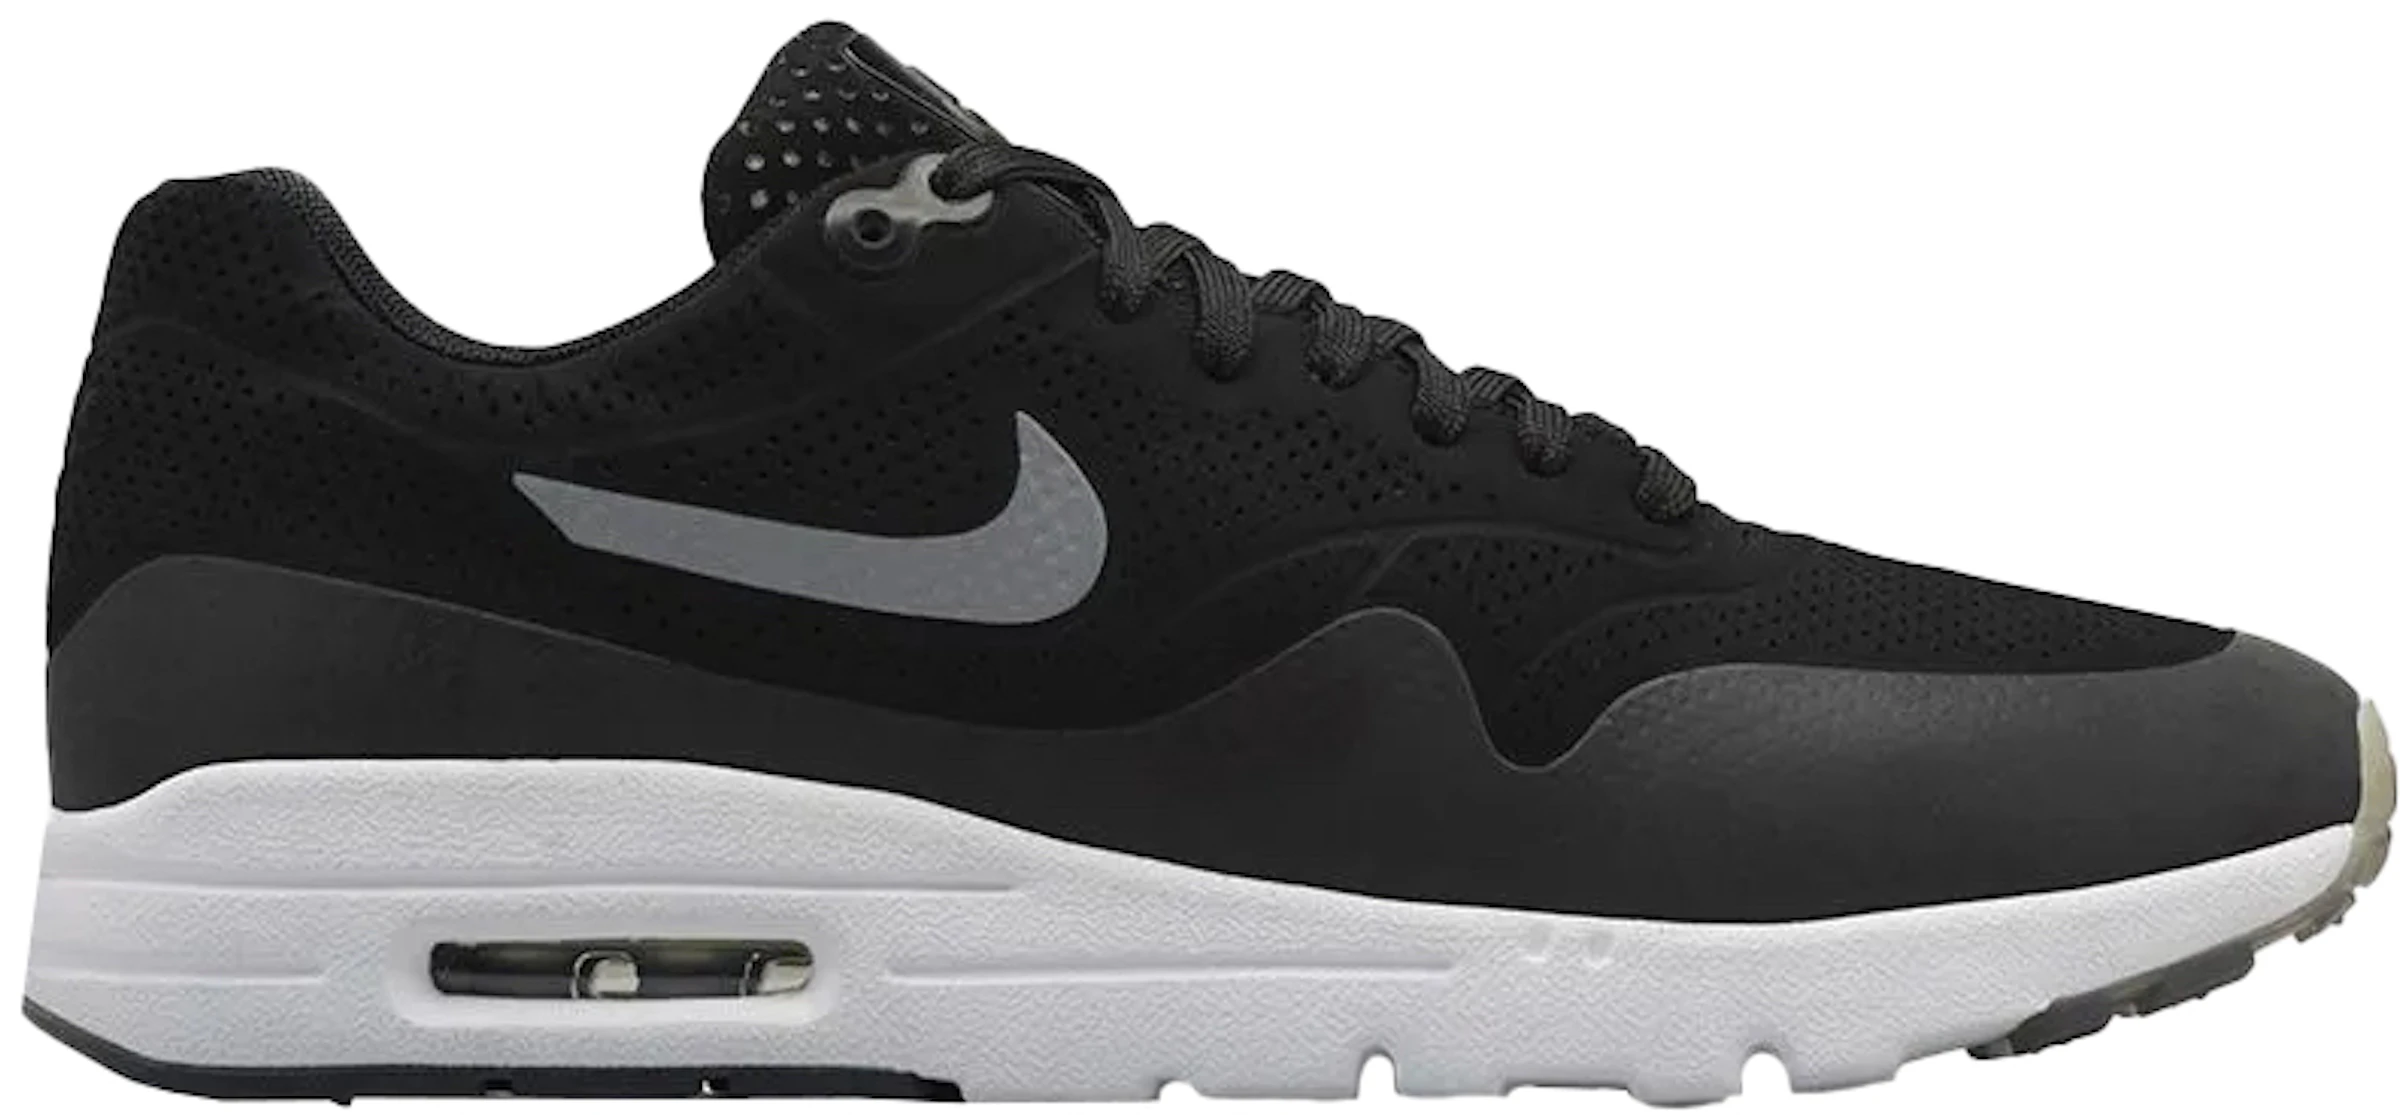 inkt contrast Schuine streep Nike Air Max 1 Ultra Moire Black (Women's) - 704995-001 - US